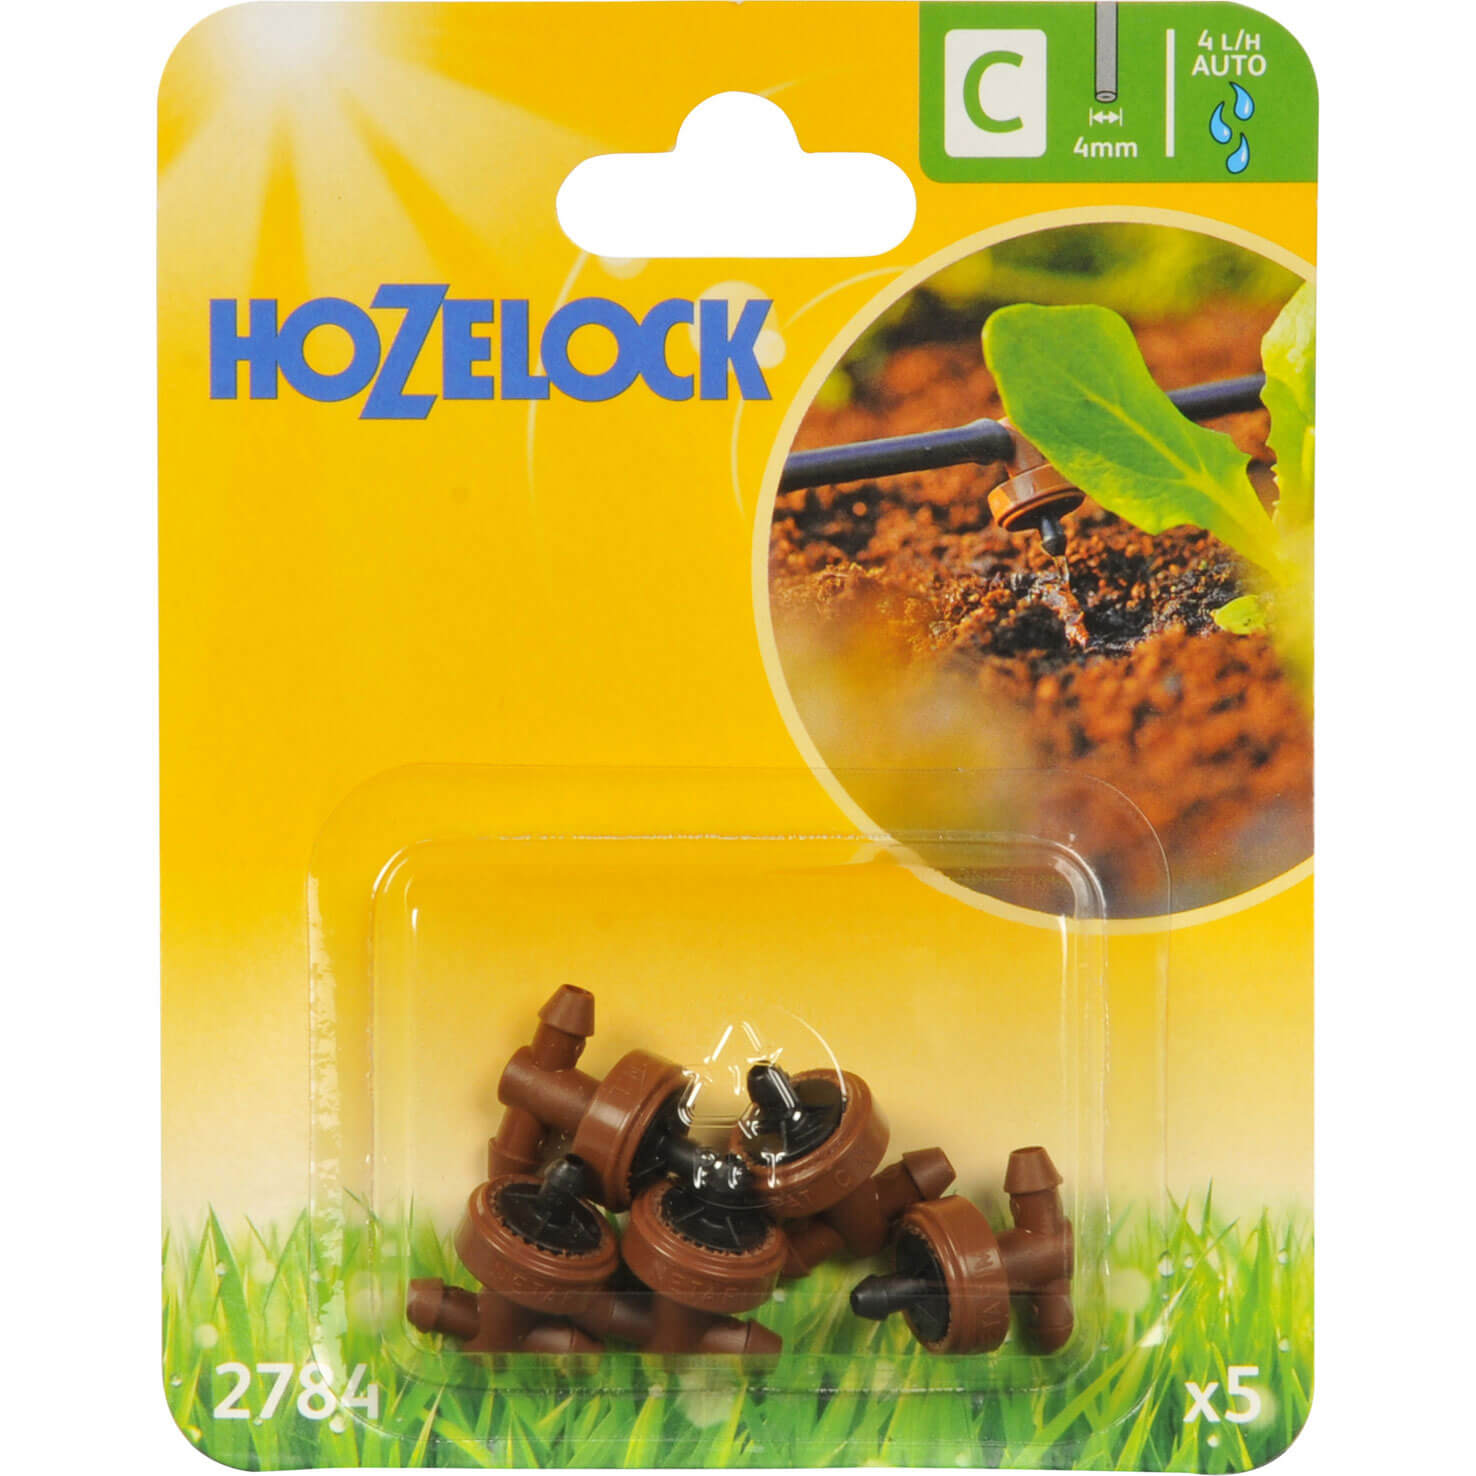 Hozelock 4LPH In line Pressure Compensating Dripper Contains 5